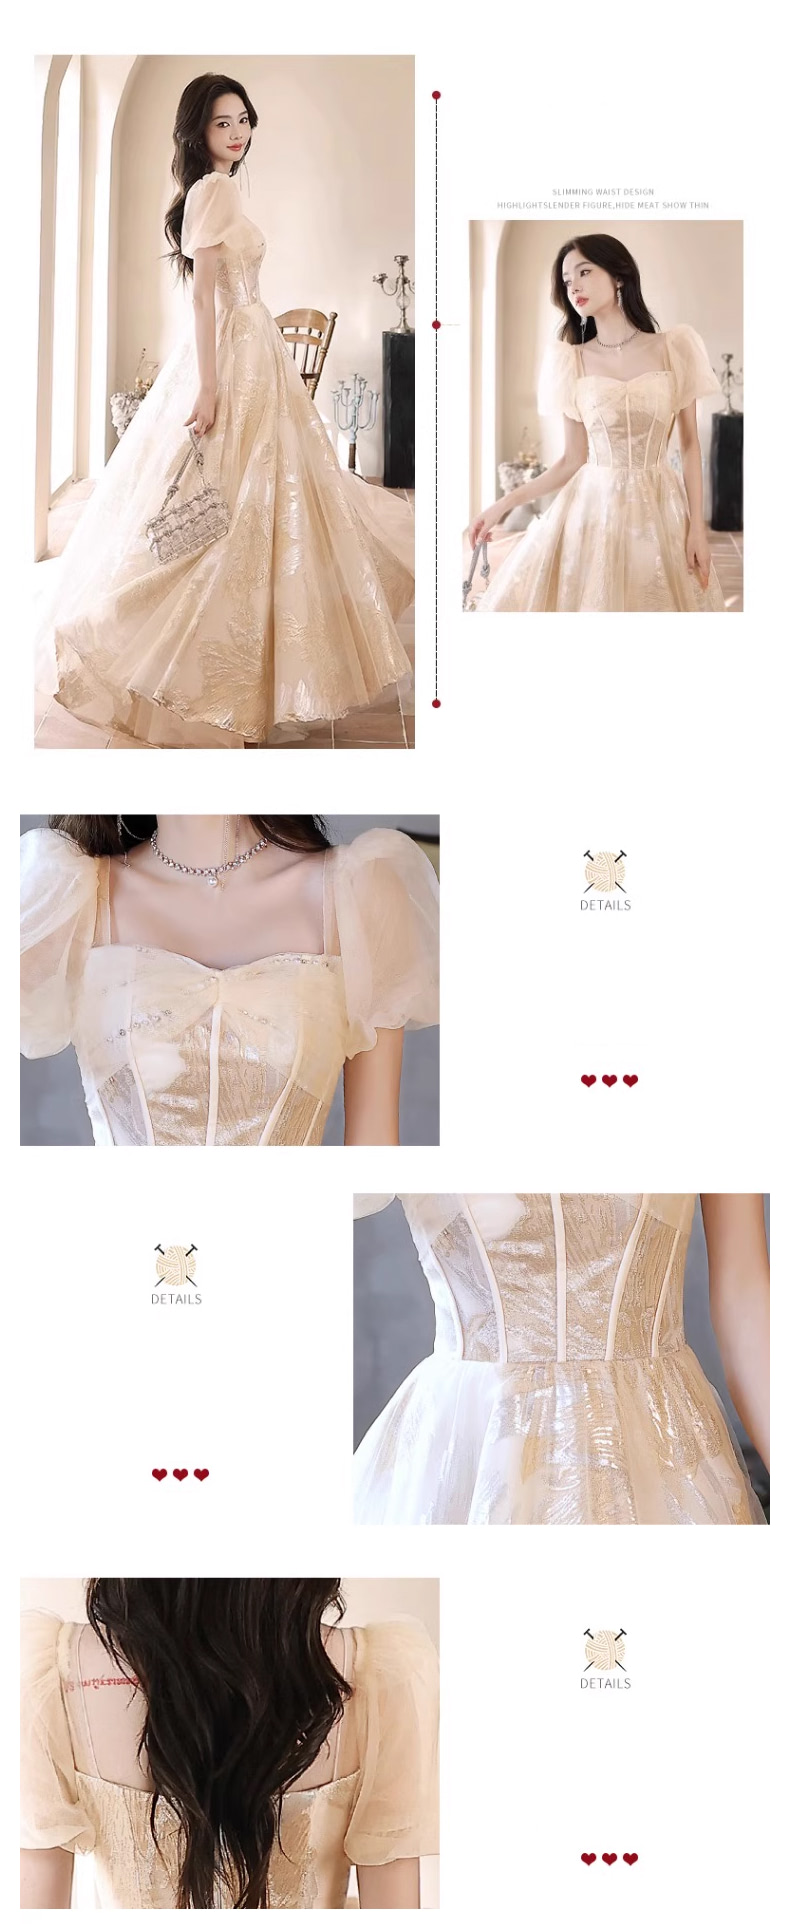 A-Line-Champagne-Puff-Sleeves-Prom-Party-Graduation-Homecoming-Dress07